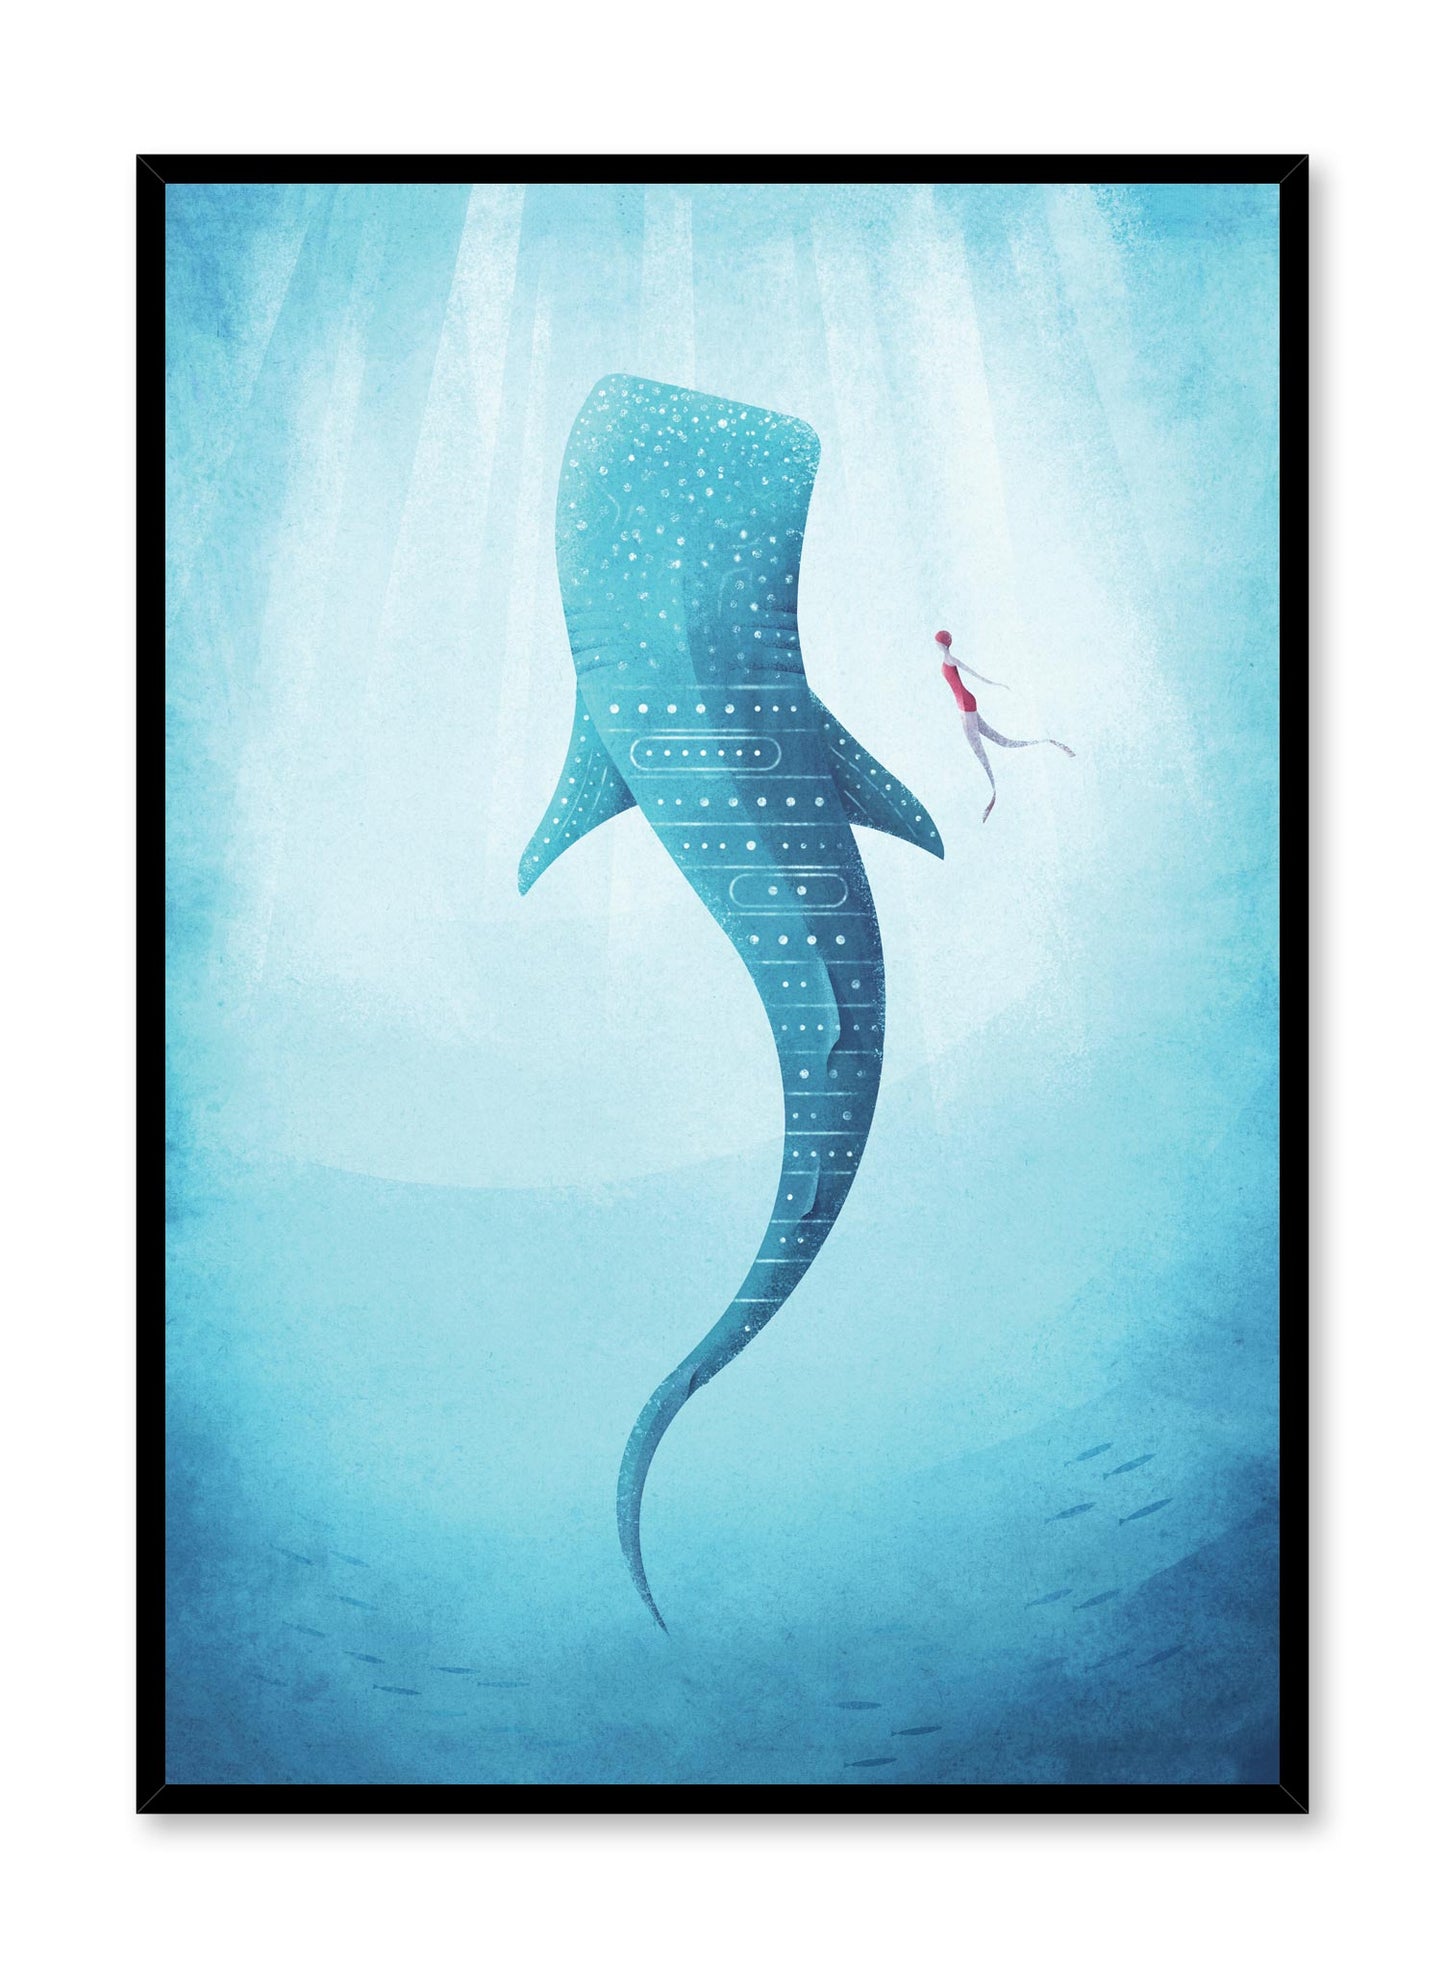 Modern minimalist travel poster by Opposite Wall with illustration under the sea